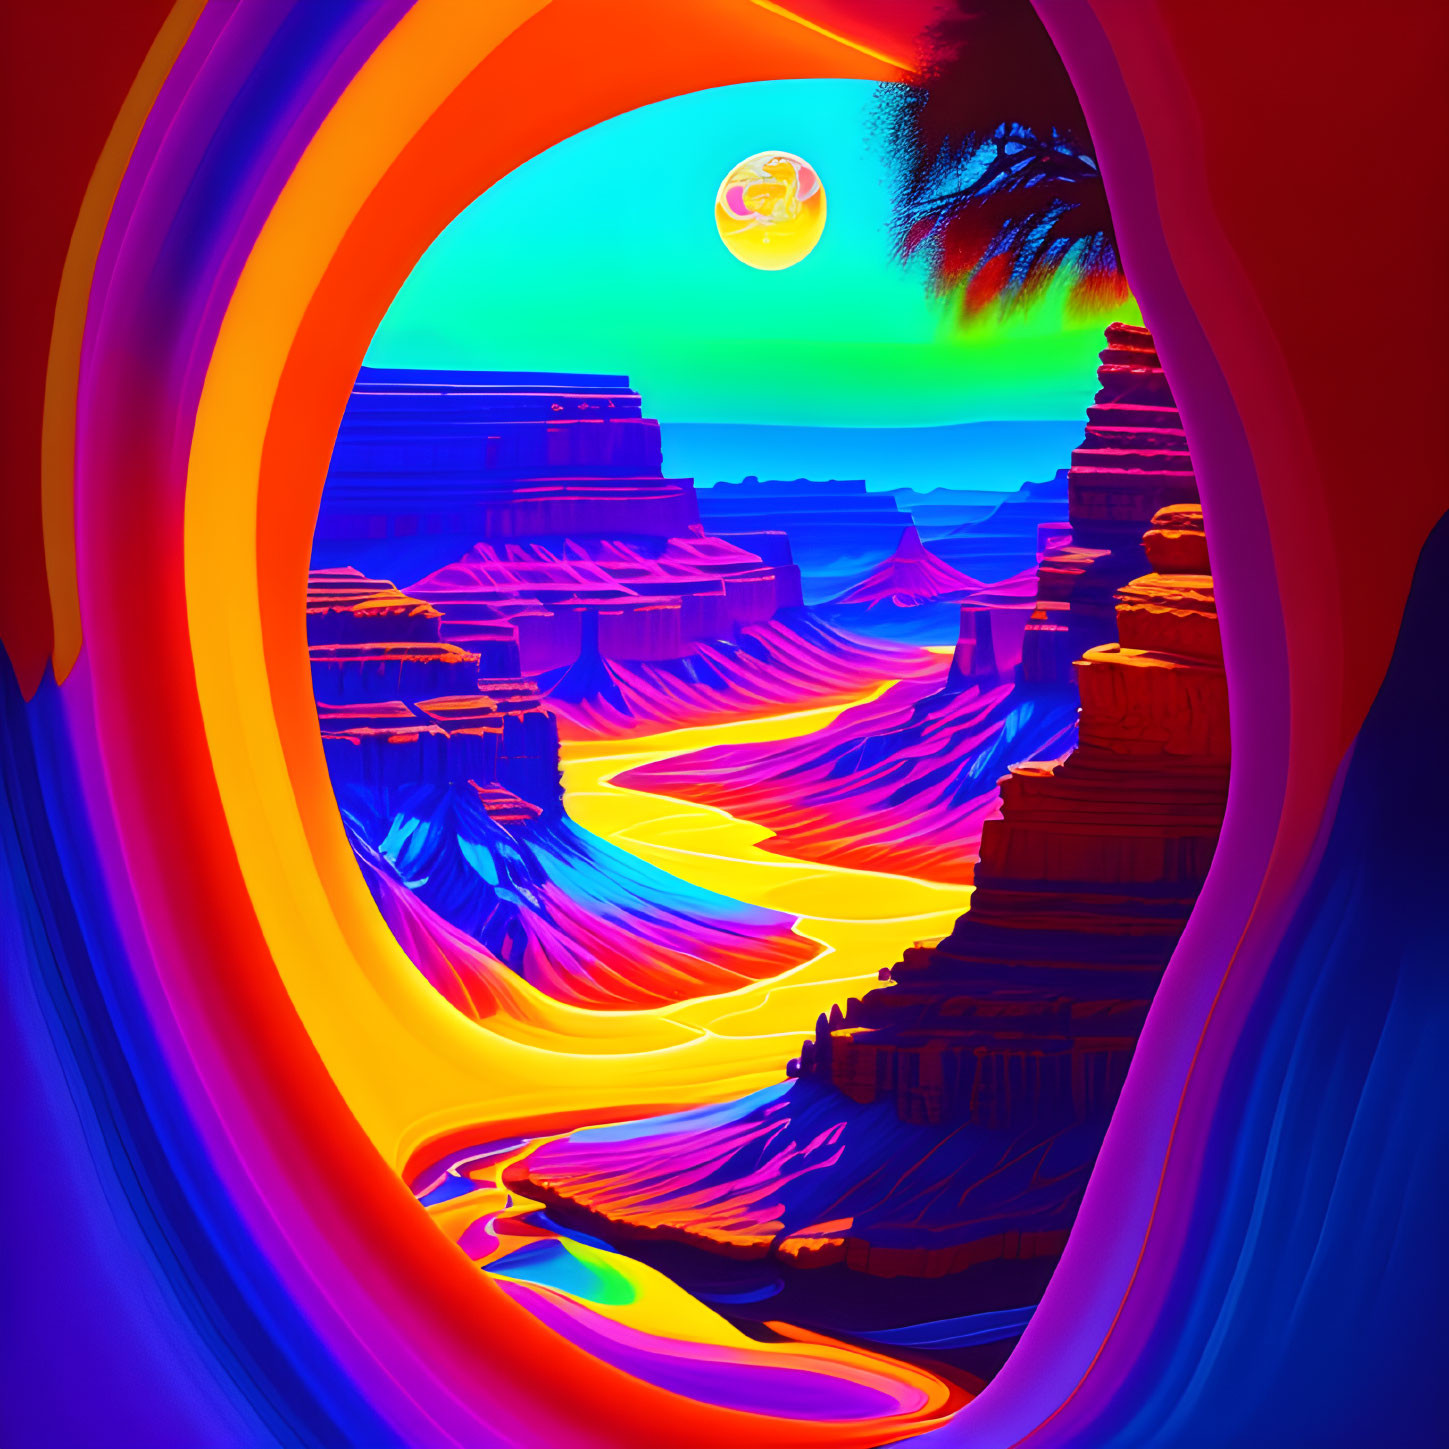 Colorful surreal landscape with flowing rivers, psychedelic cliffs, bright sun, and palm silhouette